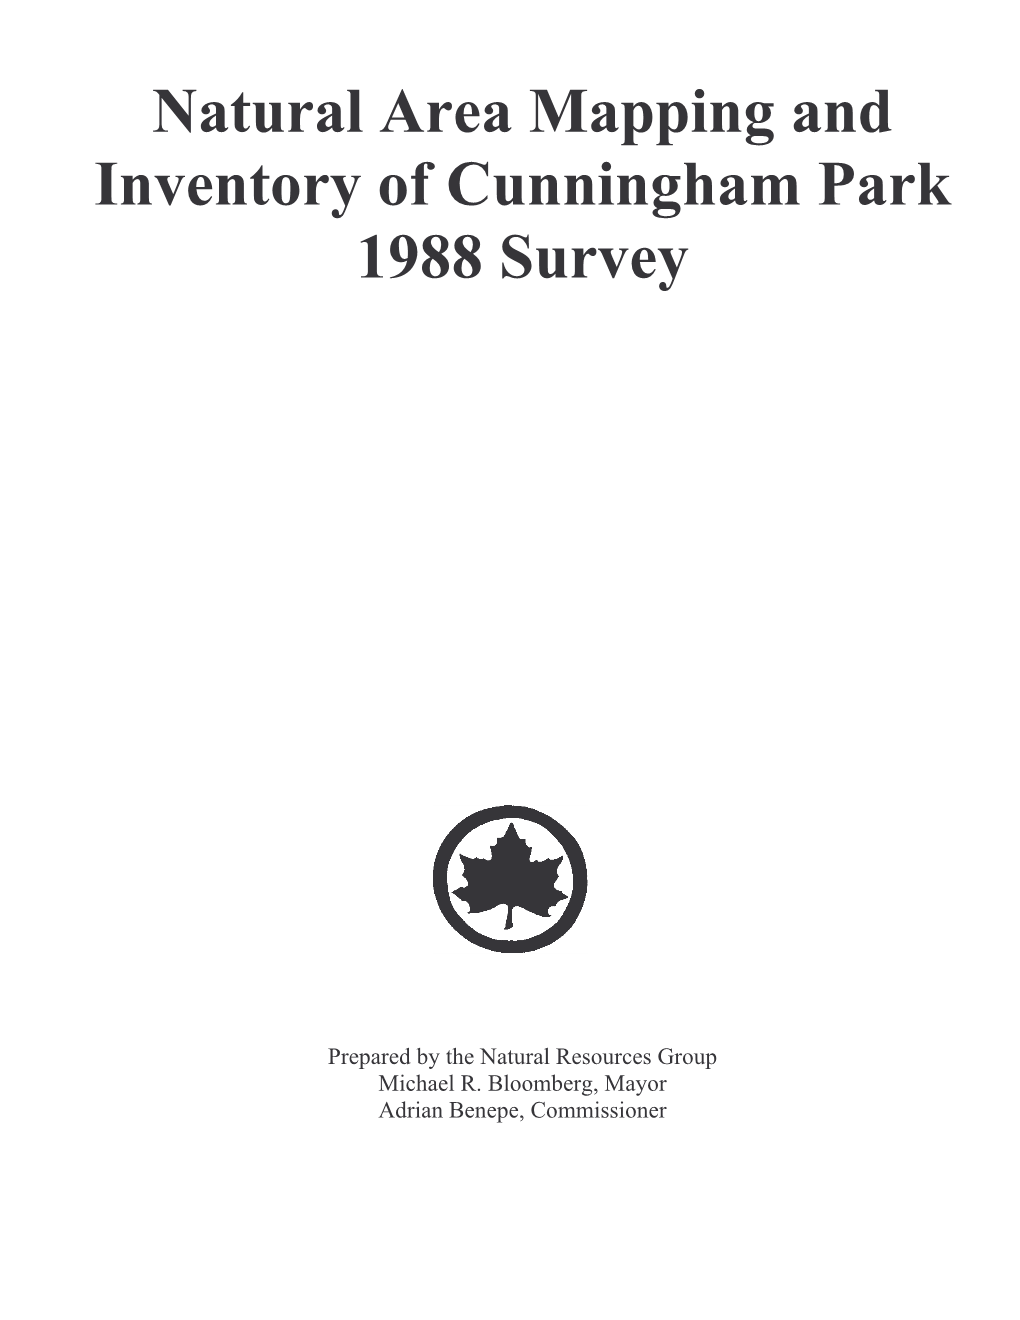 Natural Area Mapping and Inventory of Cunningham Park 1988 Survey